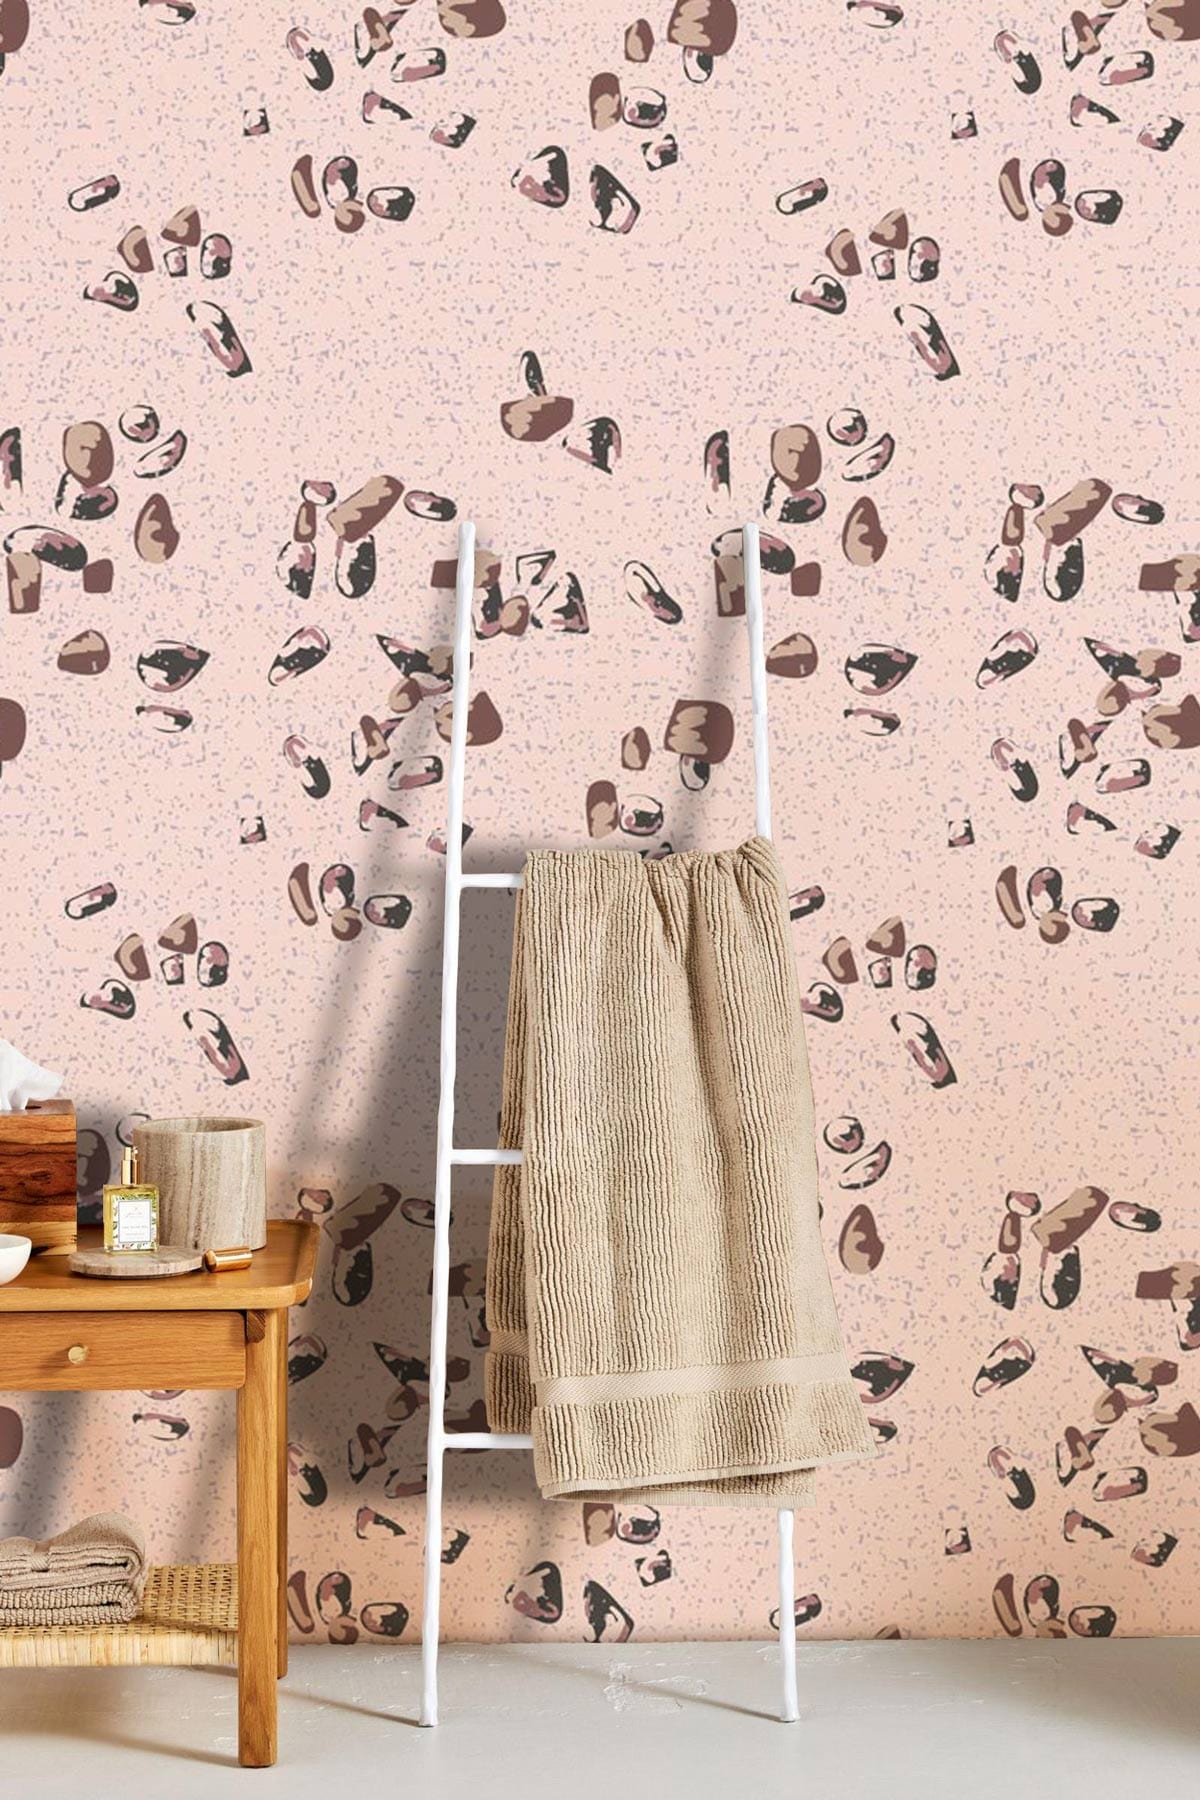 Decorate your living room with this fragmented marble pattern wallpaper mural.